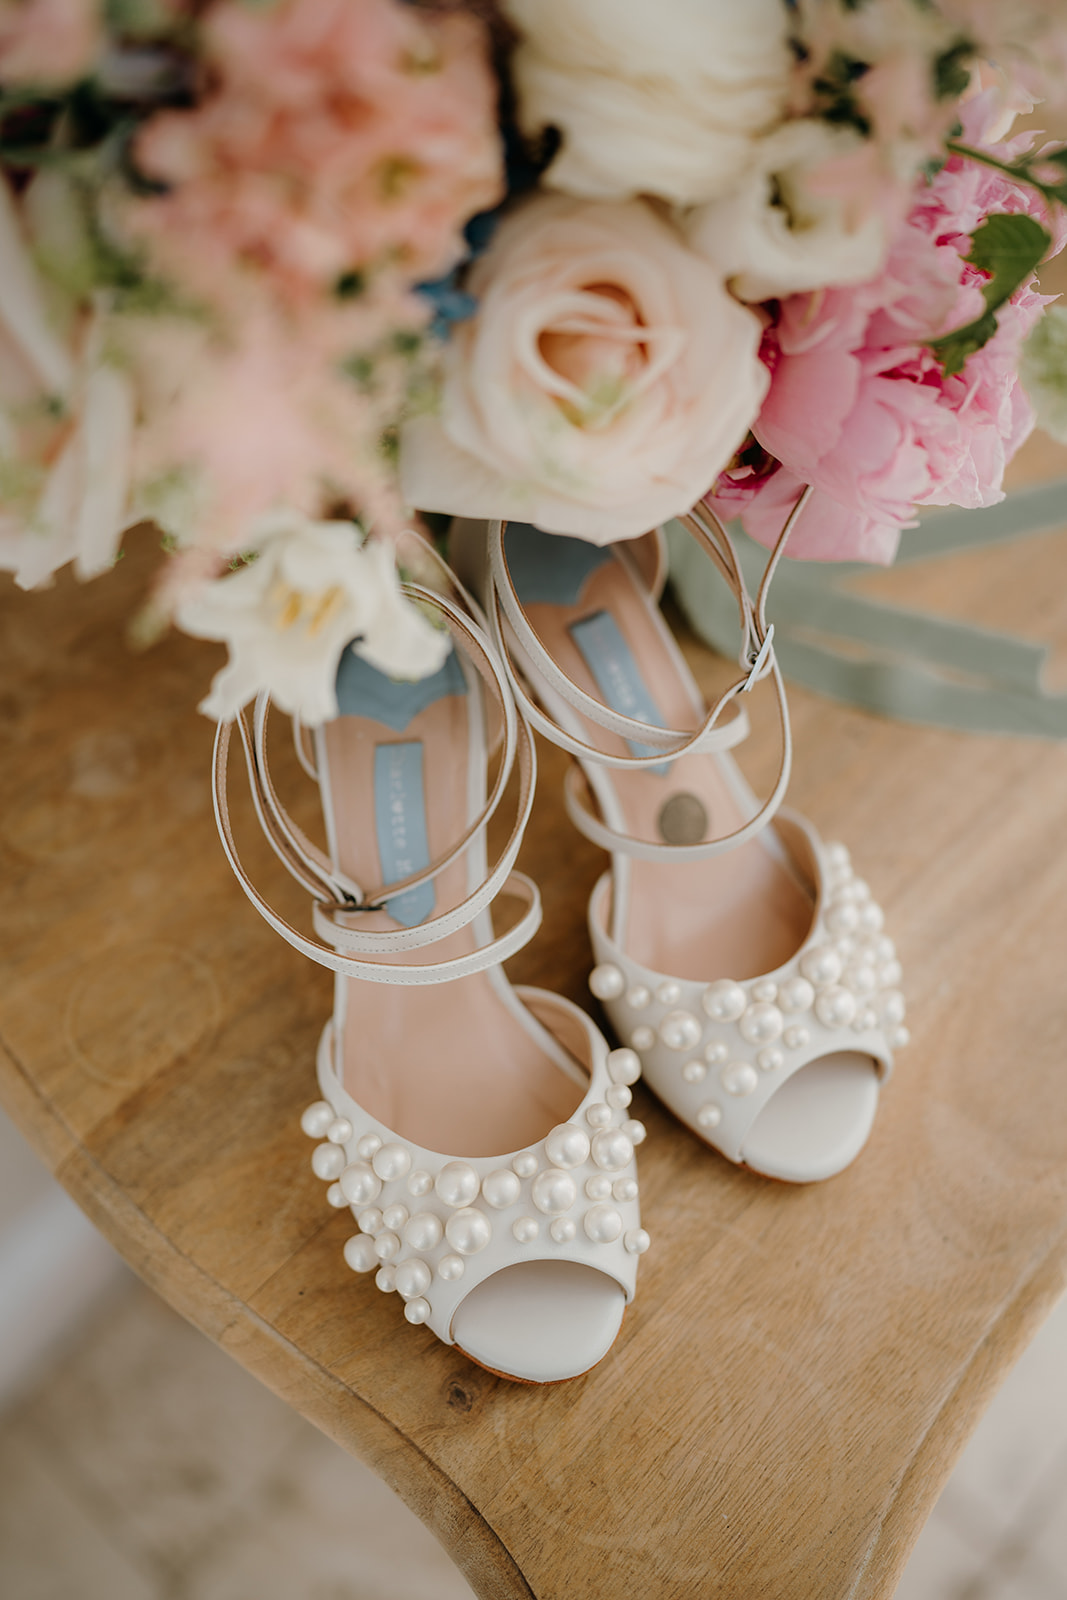 Bridal shoes and bouquet on morning of the wedding